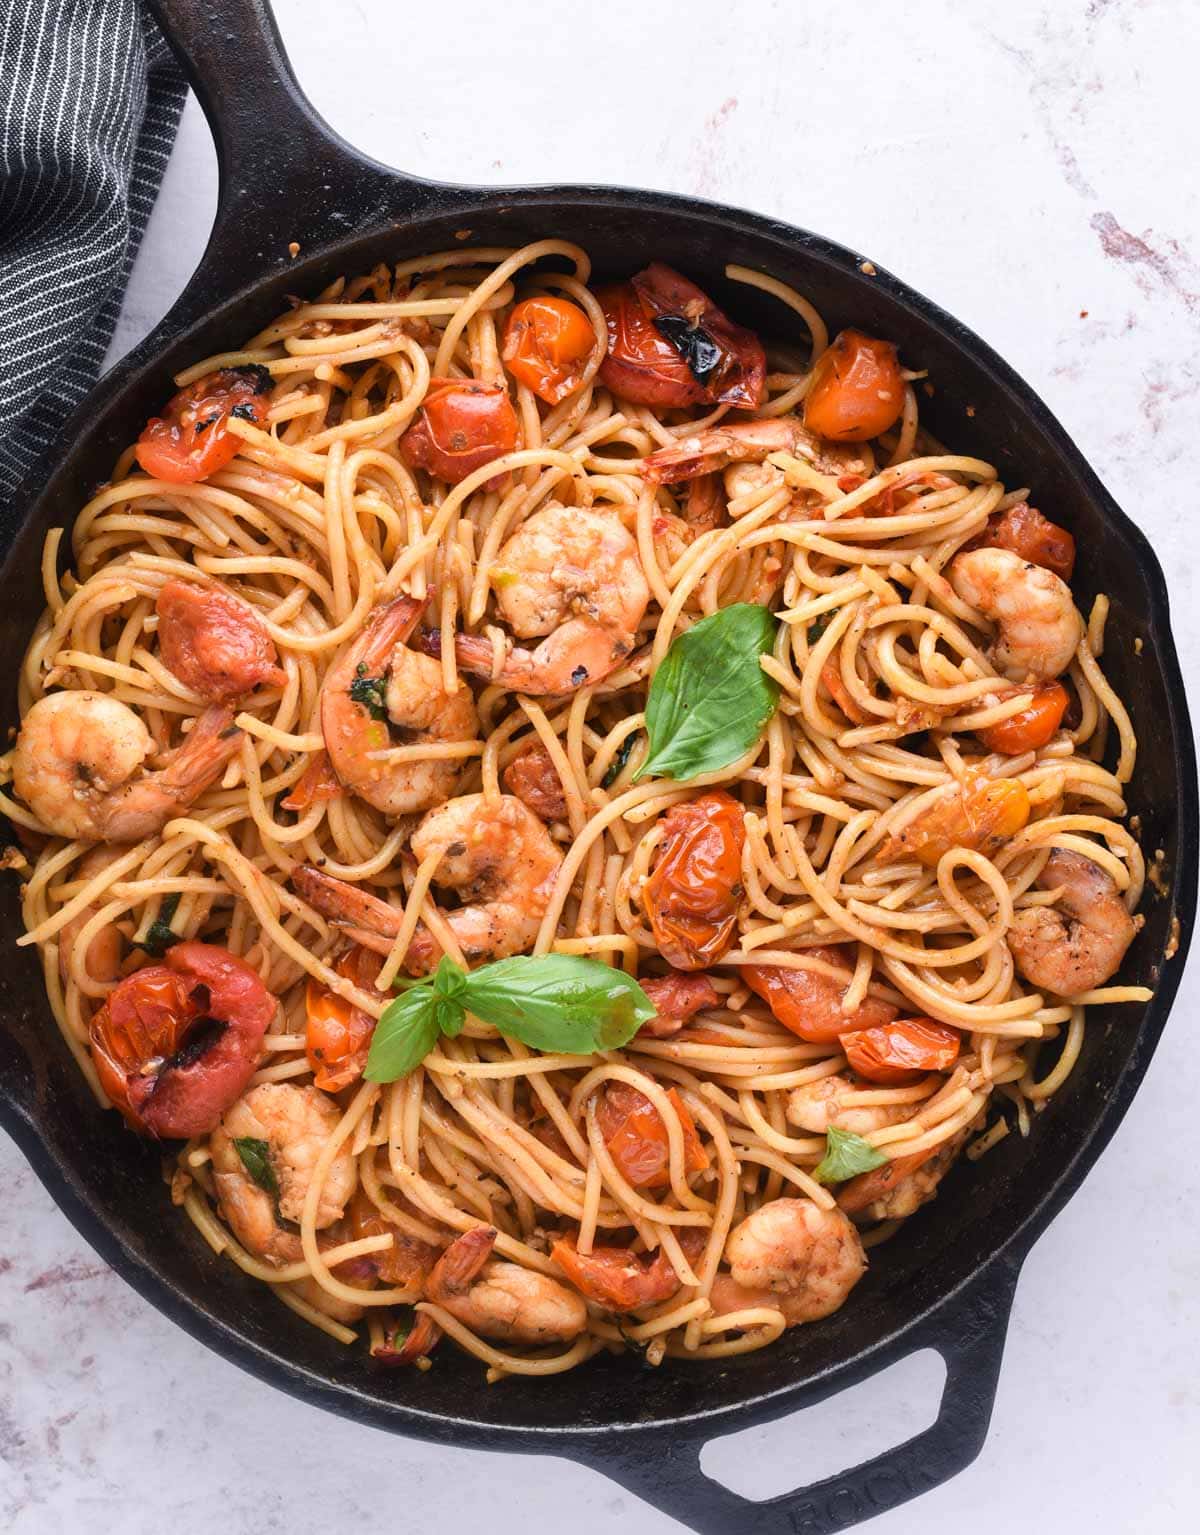 Cheery Tomato Pasta with shrimp has a summer vibe in it. Fresh cherry tomato, garlic, olive oil, lots of fresh basil, and shrimp, this tomato pasta is light and refreshing. 